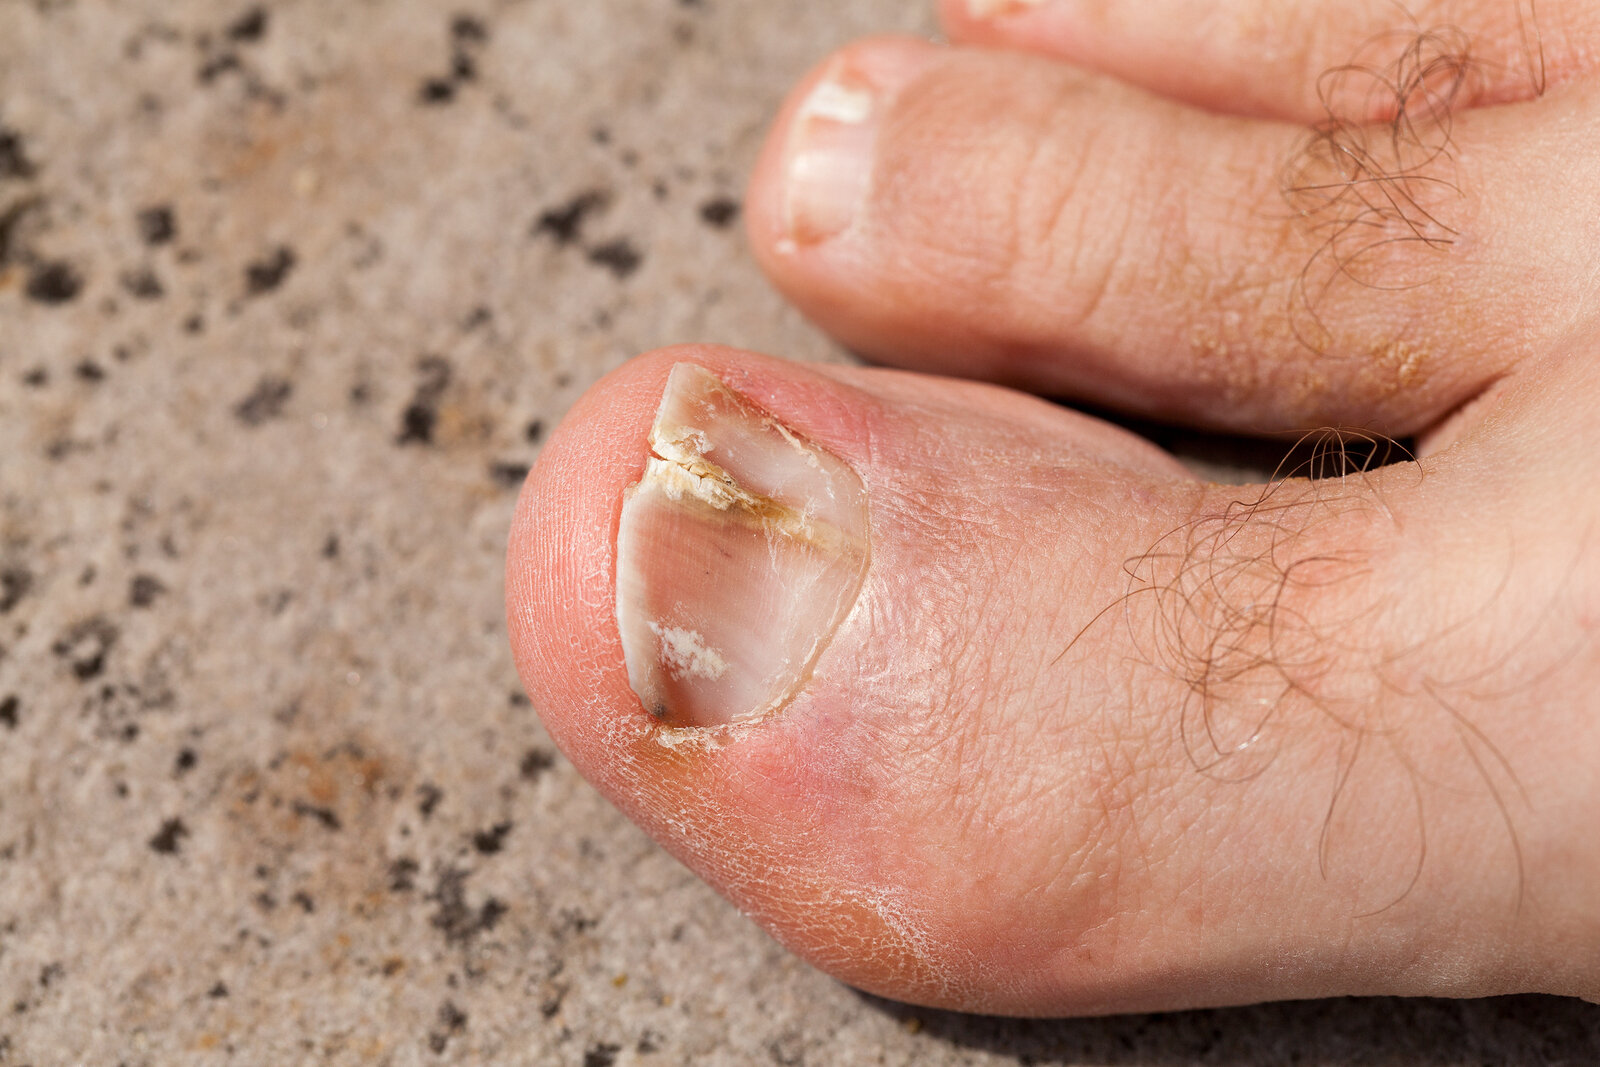 Fungal Nail Infections | Ausmed